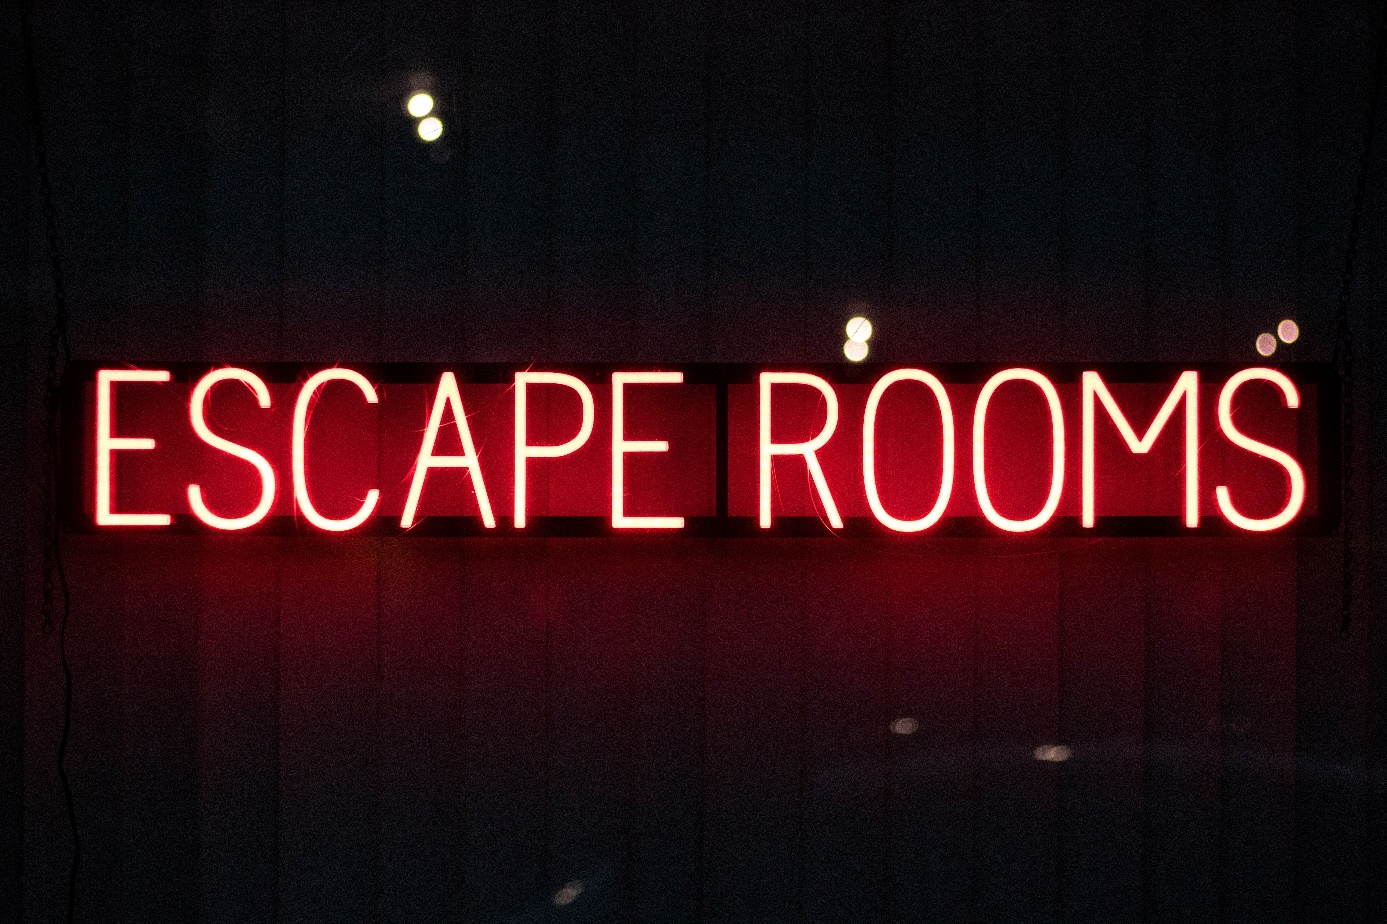 15 most popular puzzle types you can find in an escape room